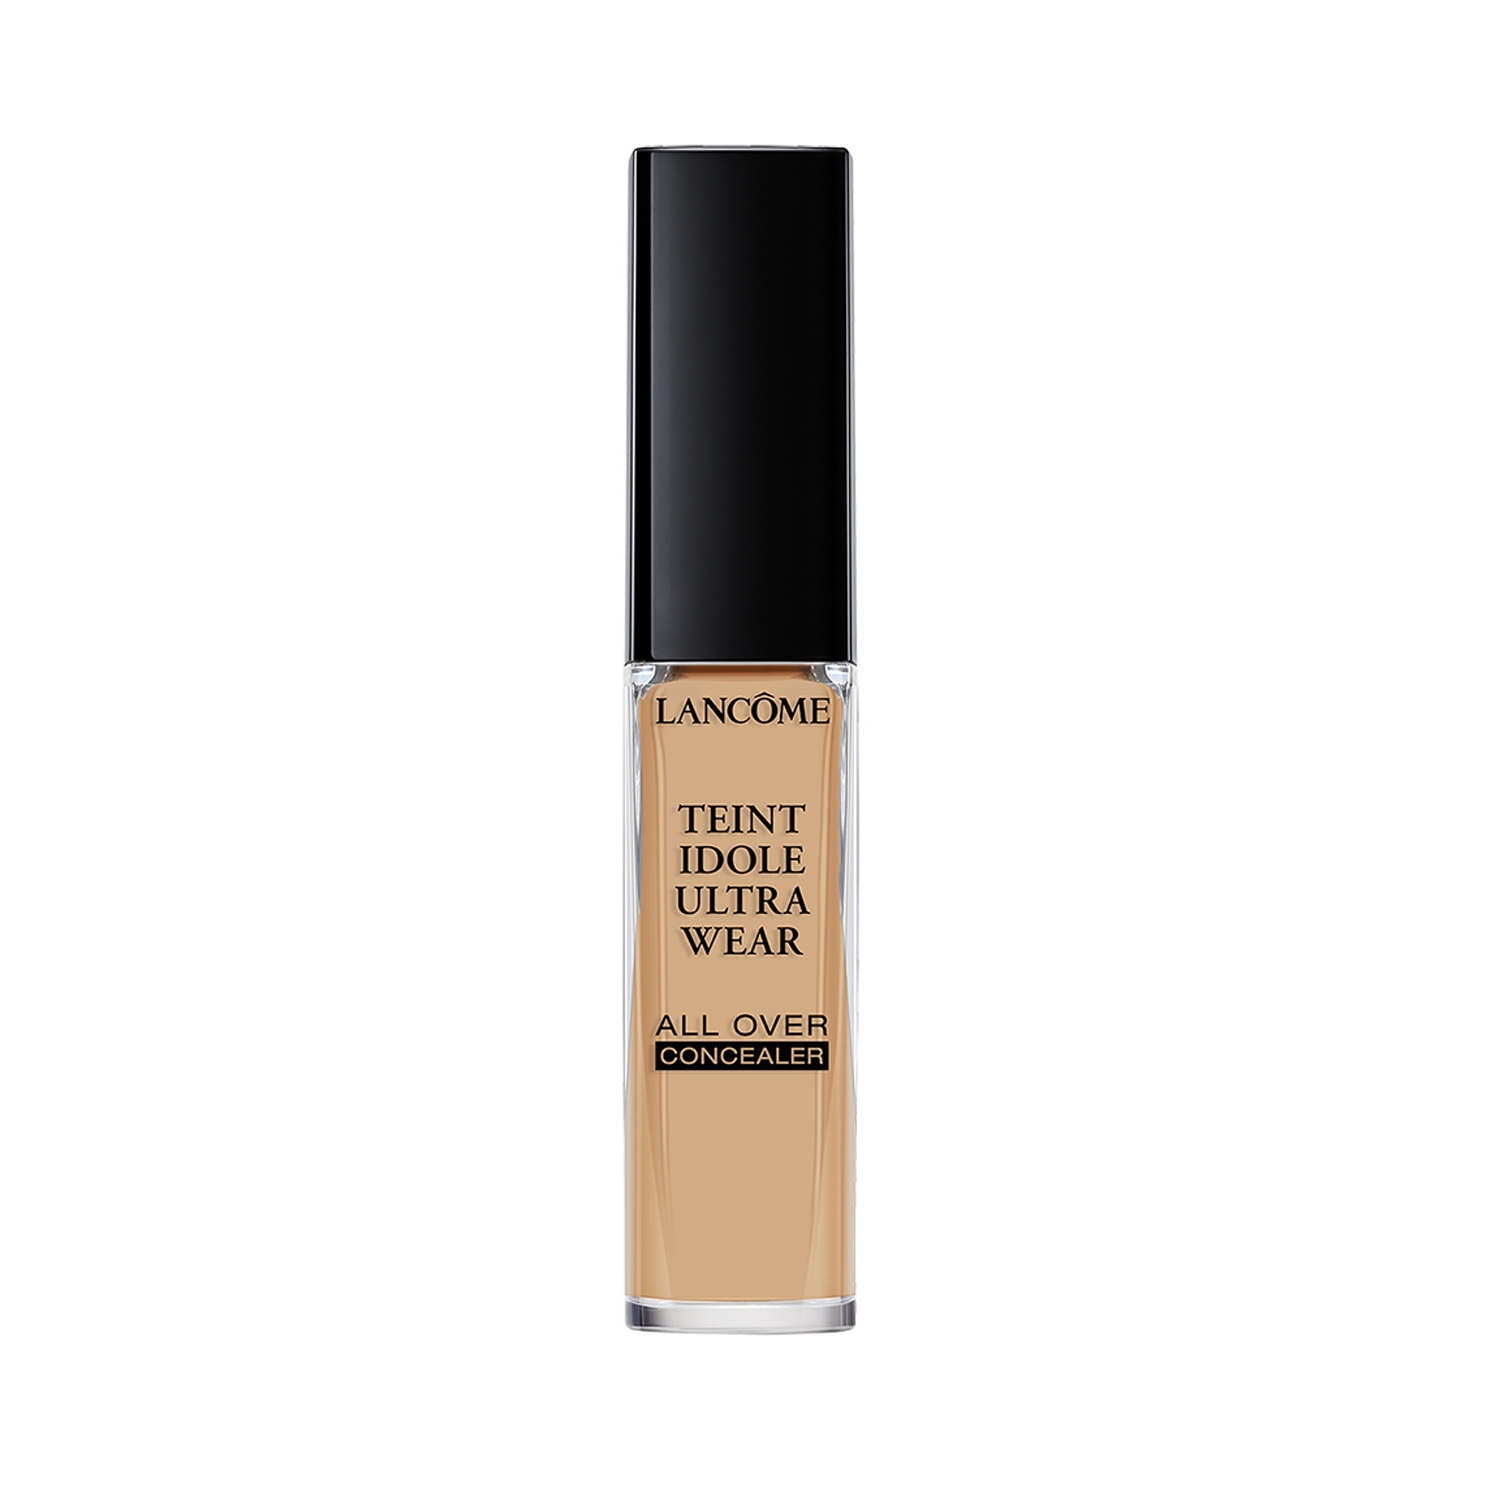 Lancome | Lancome Teint Idole Ultra Wear All Over Multi-Tasking Concealer - 051 Chataigne-420 Bisque N (13ml)